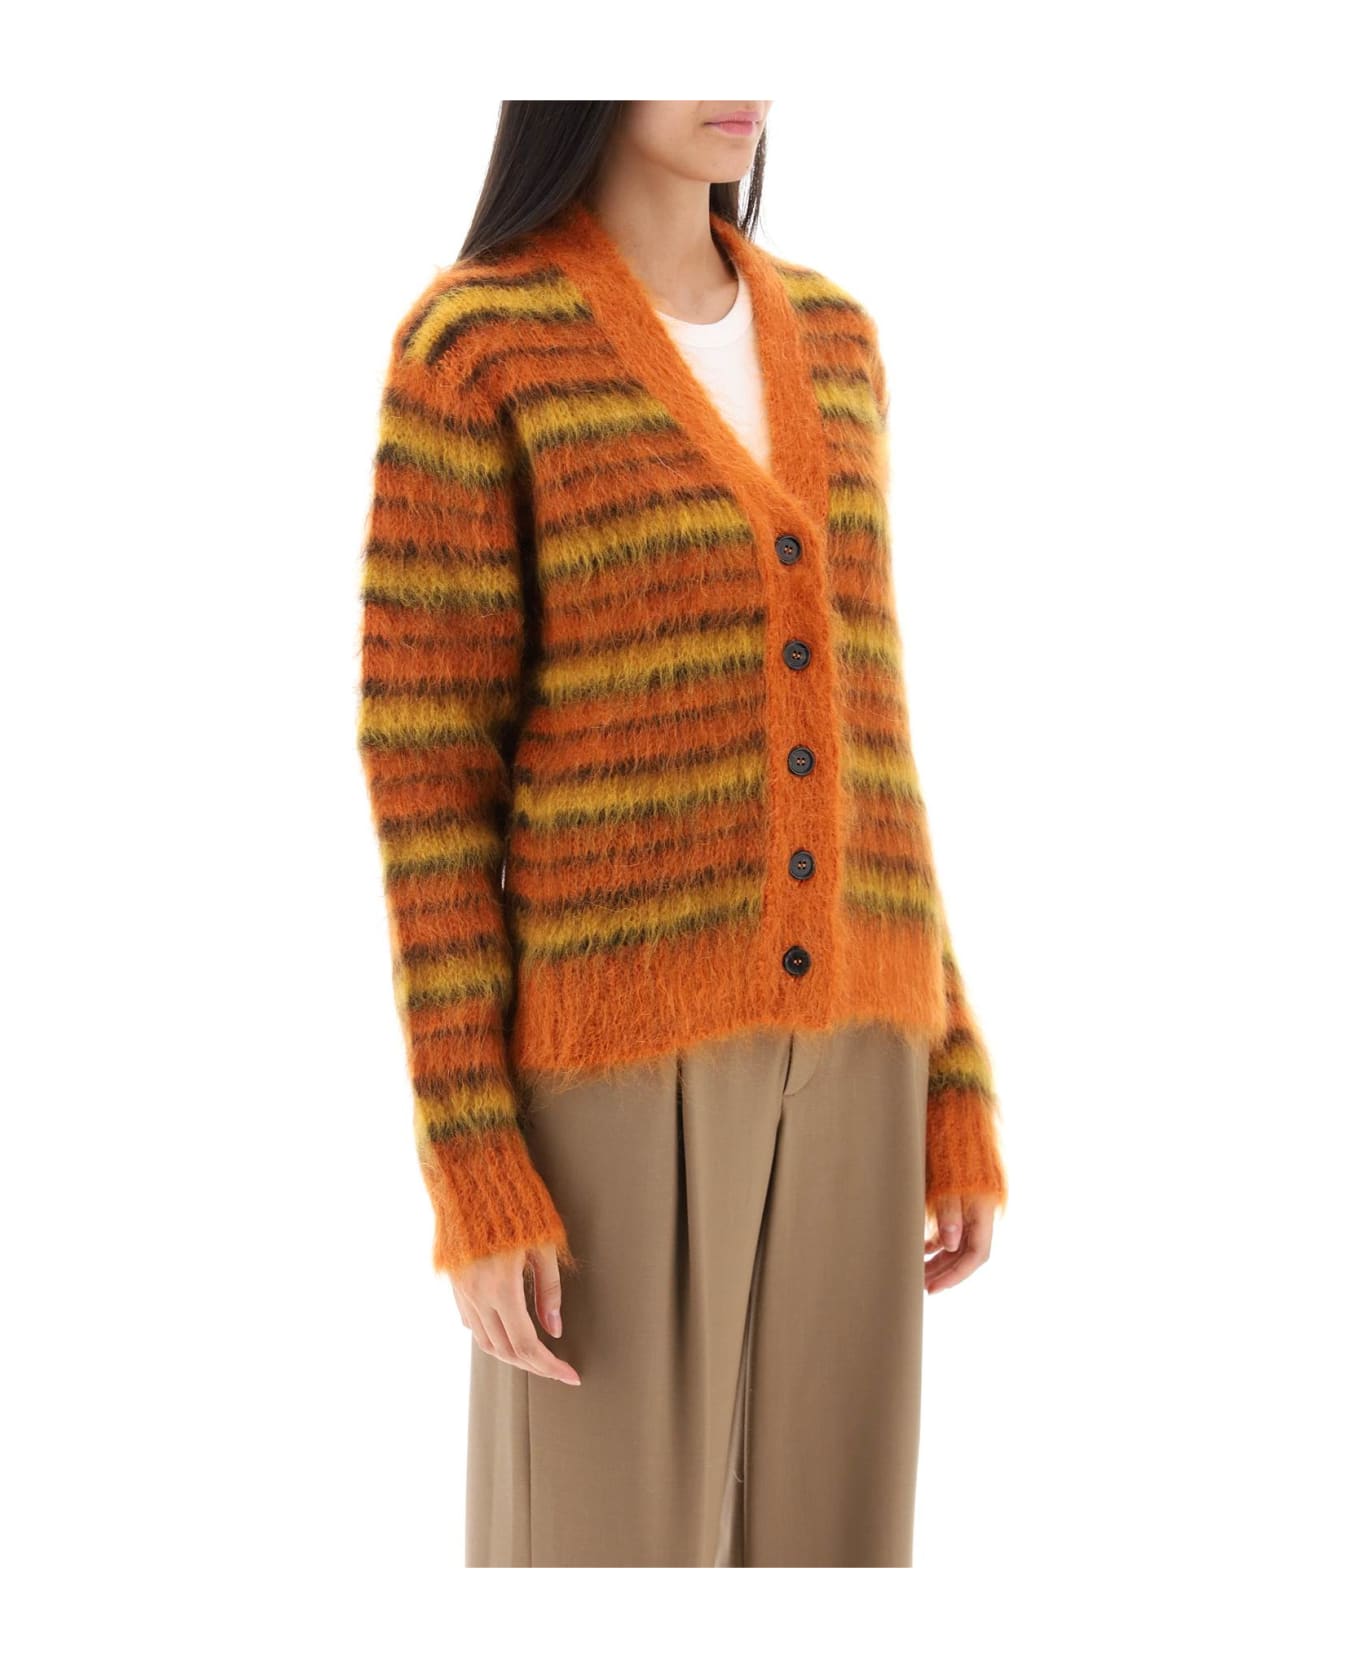 Marni Cardigan In Striped Brushed Mohair - LOBSTER (Orange)